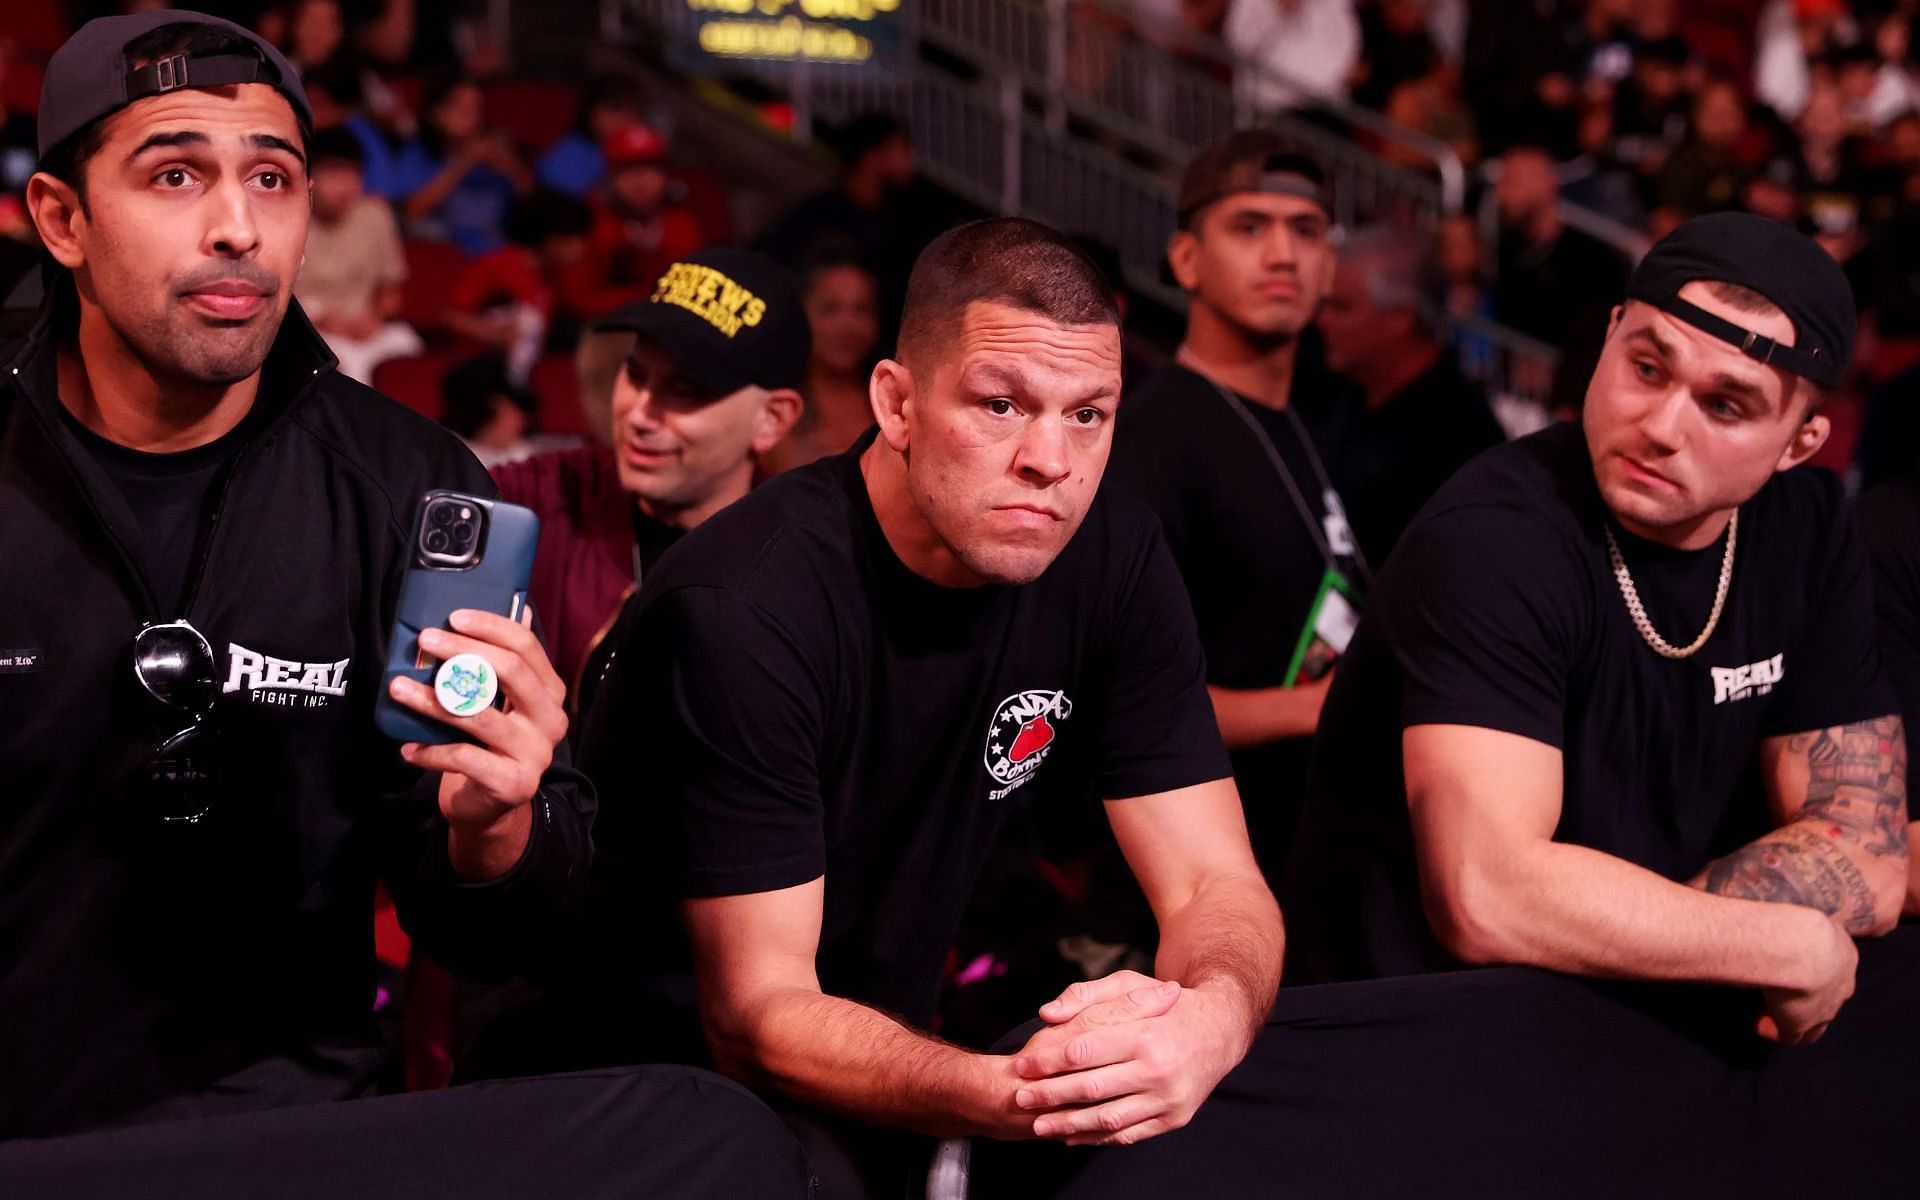 Nate Diaz is in legal trouble [Image Credit: Getty]